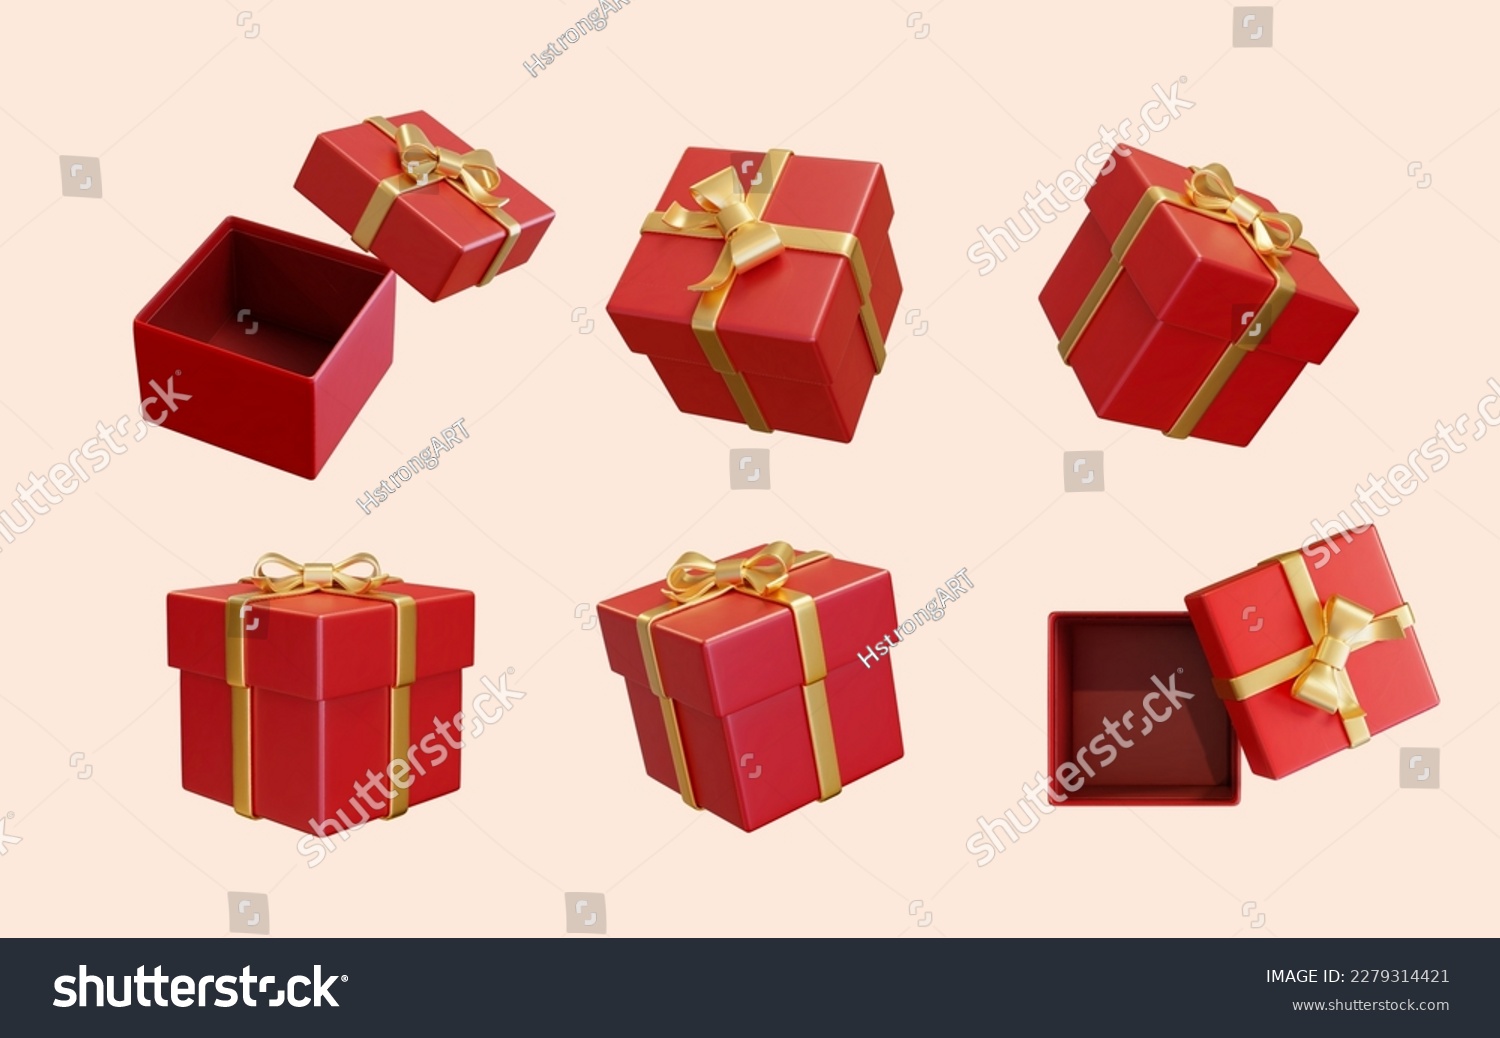 3D Illustration of red giftboxes wrapped with gold ribbon open and close mockups in different angle isolated on light pink background. Suitable for birthday party and festive celebration. #2279314421